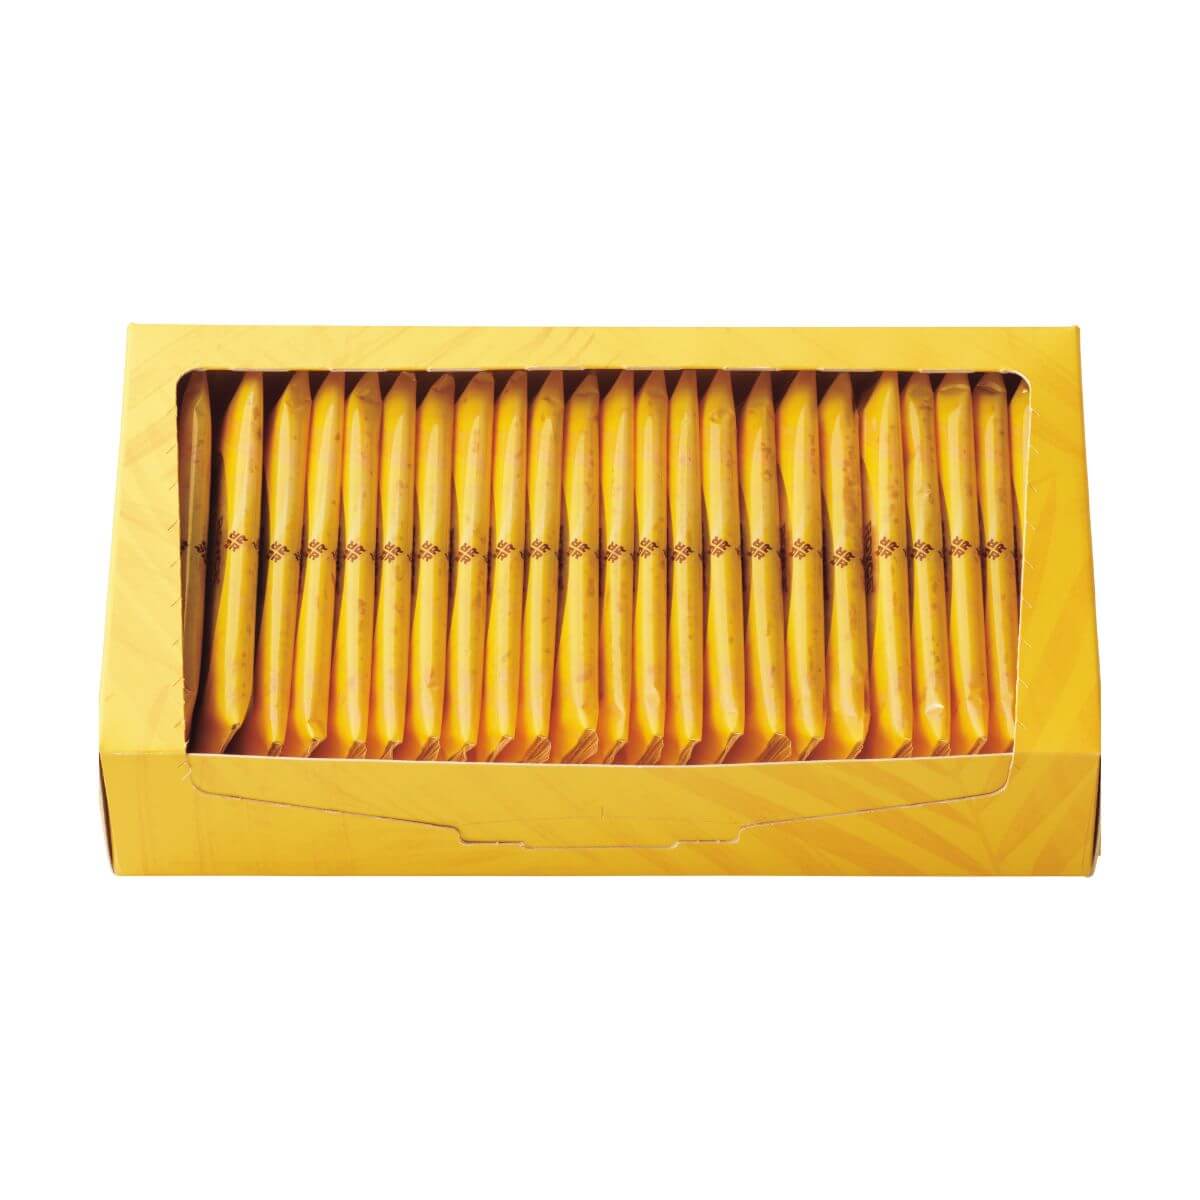 ROYCE' Chocolate - Baton Cookies "Coconut" - Image shows yellow box filled with individually-wrapped cookies with yellow wrapper.